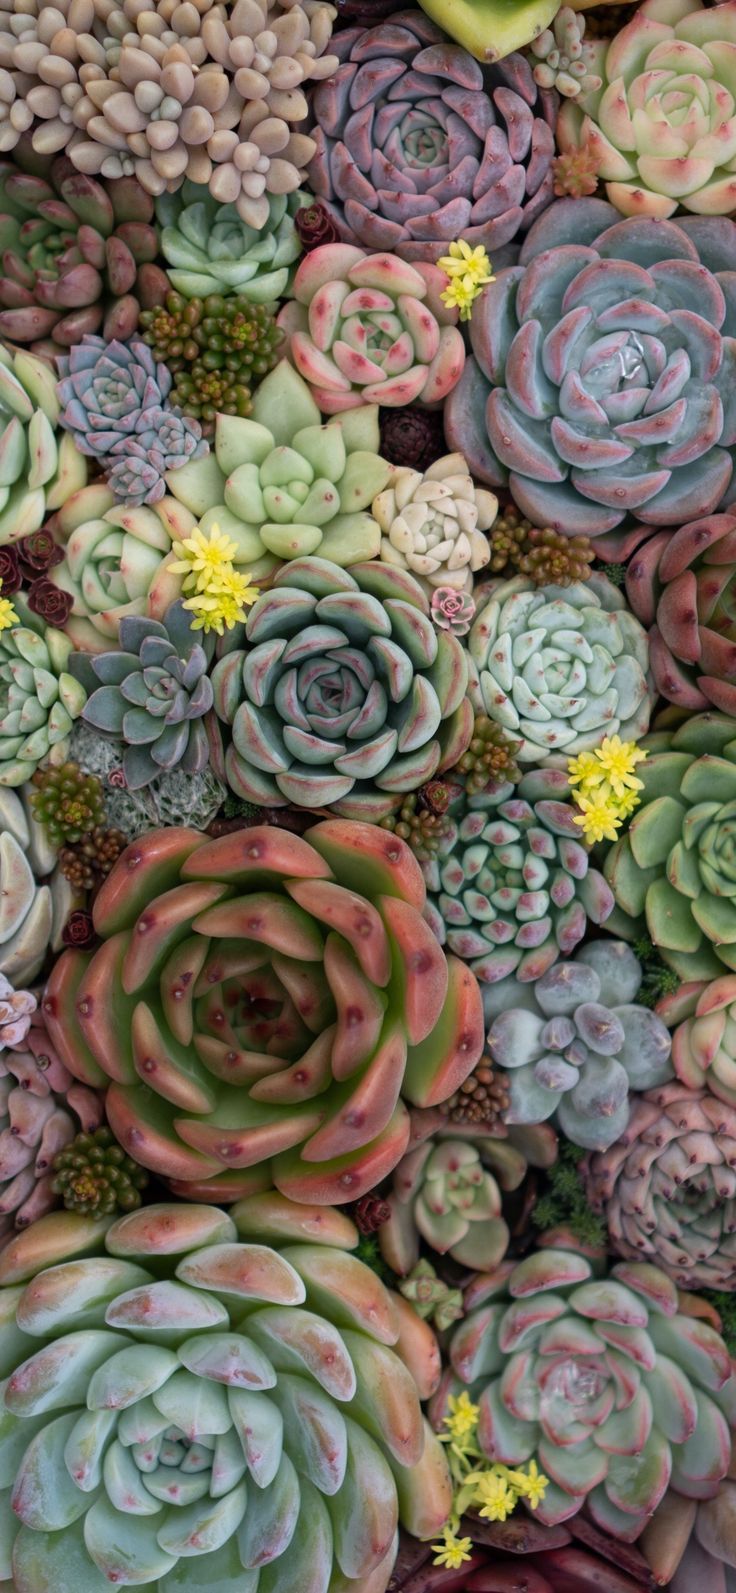 A variety of succulents in shades of green, pink, and purple. - Succulent